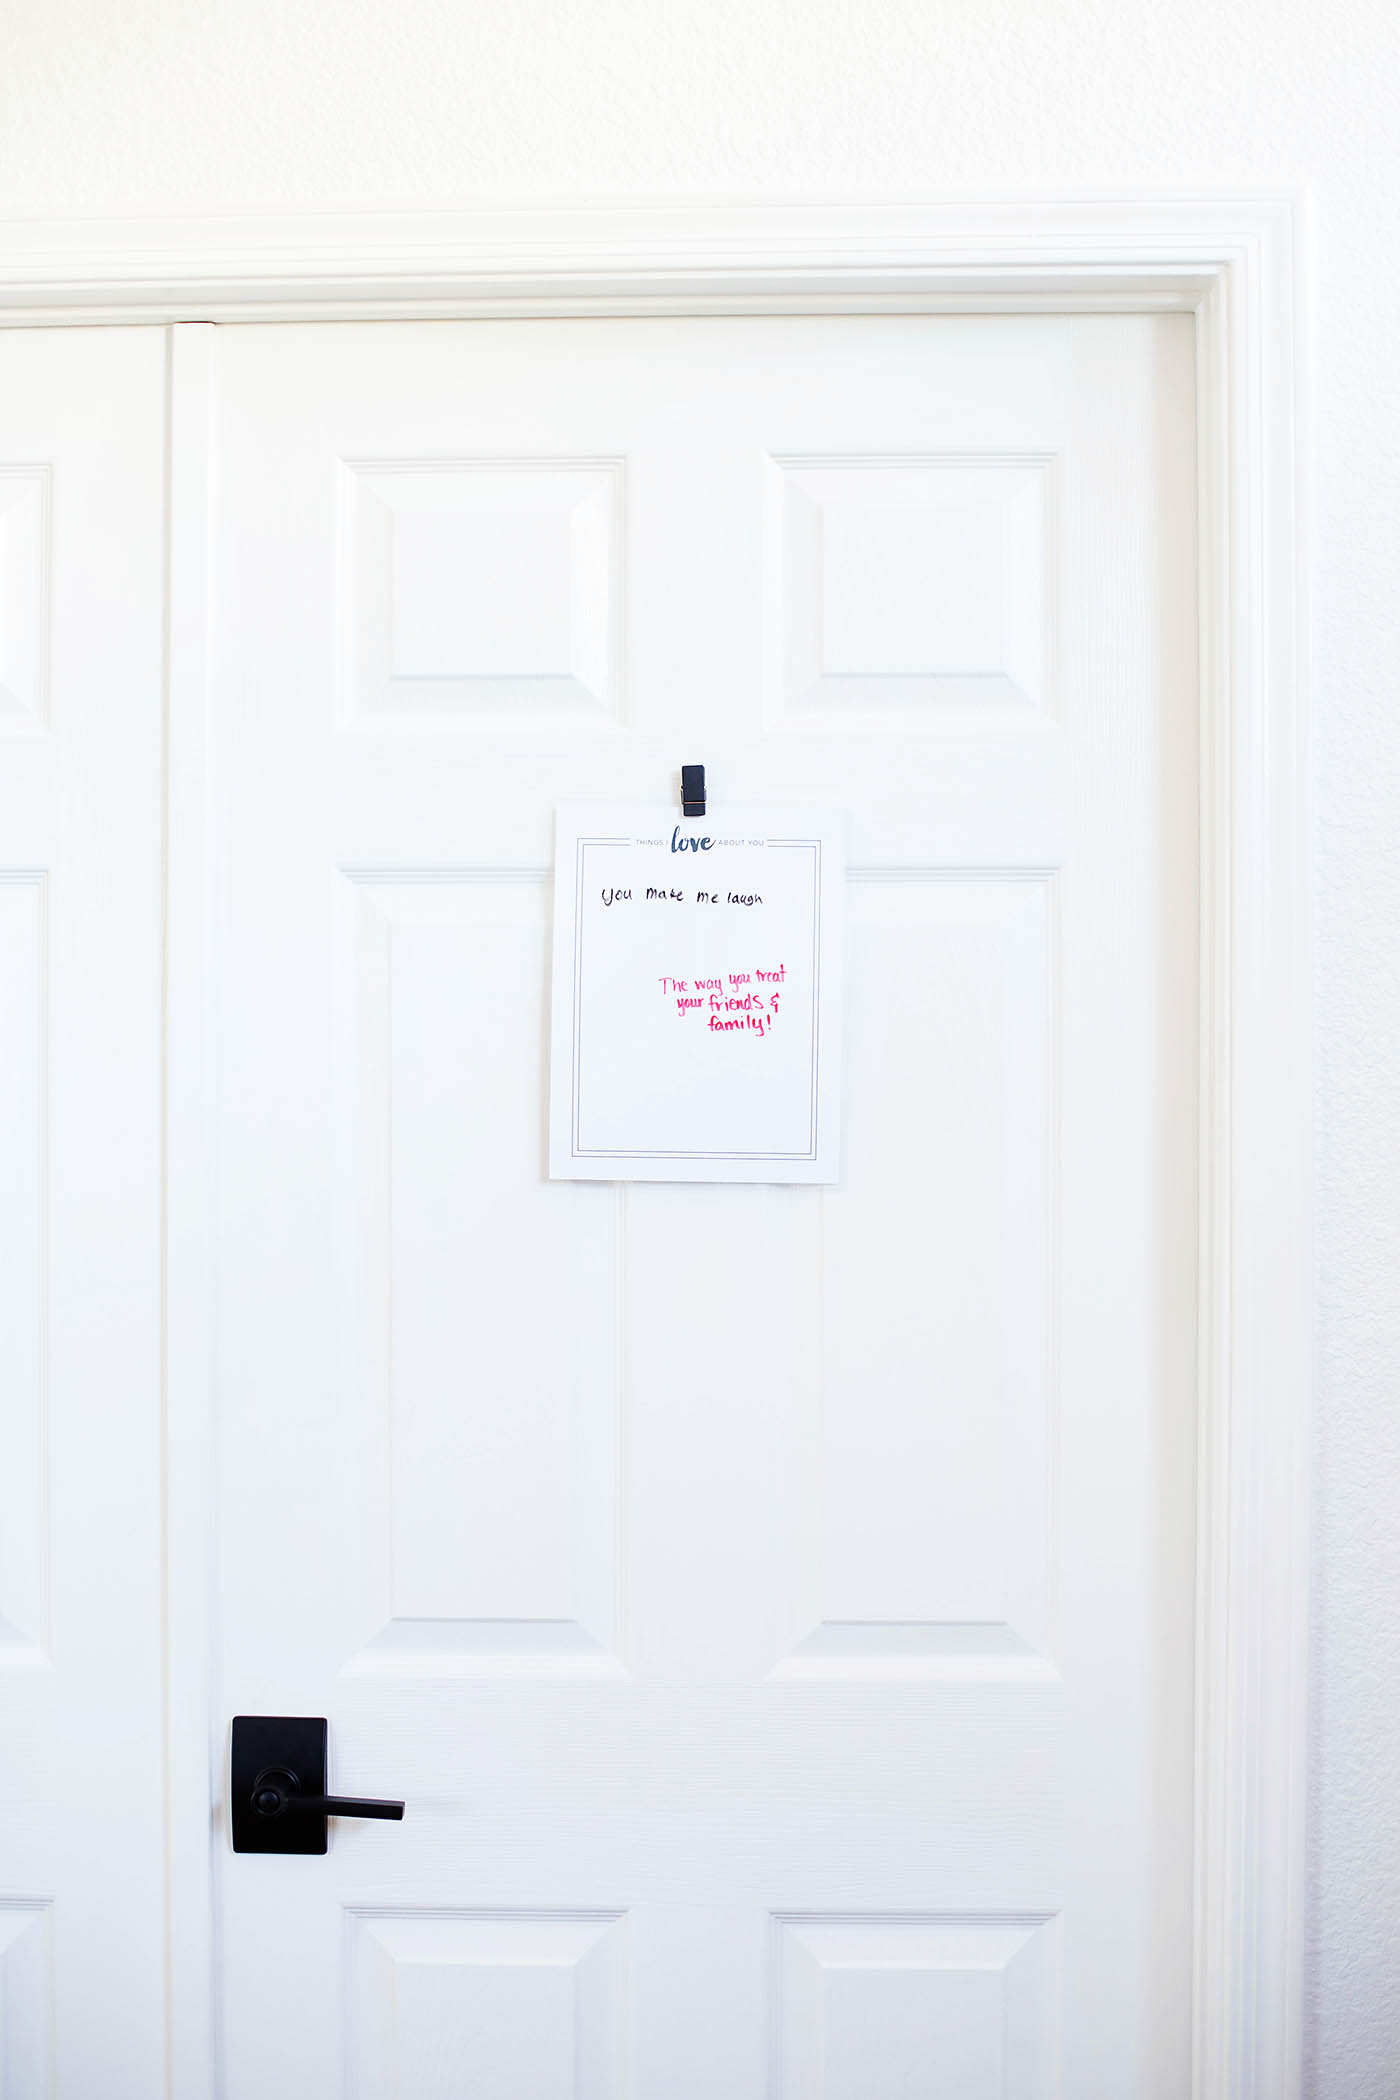 Things I love about you Valentine's Day door printable - perfect for teens!